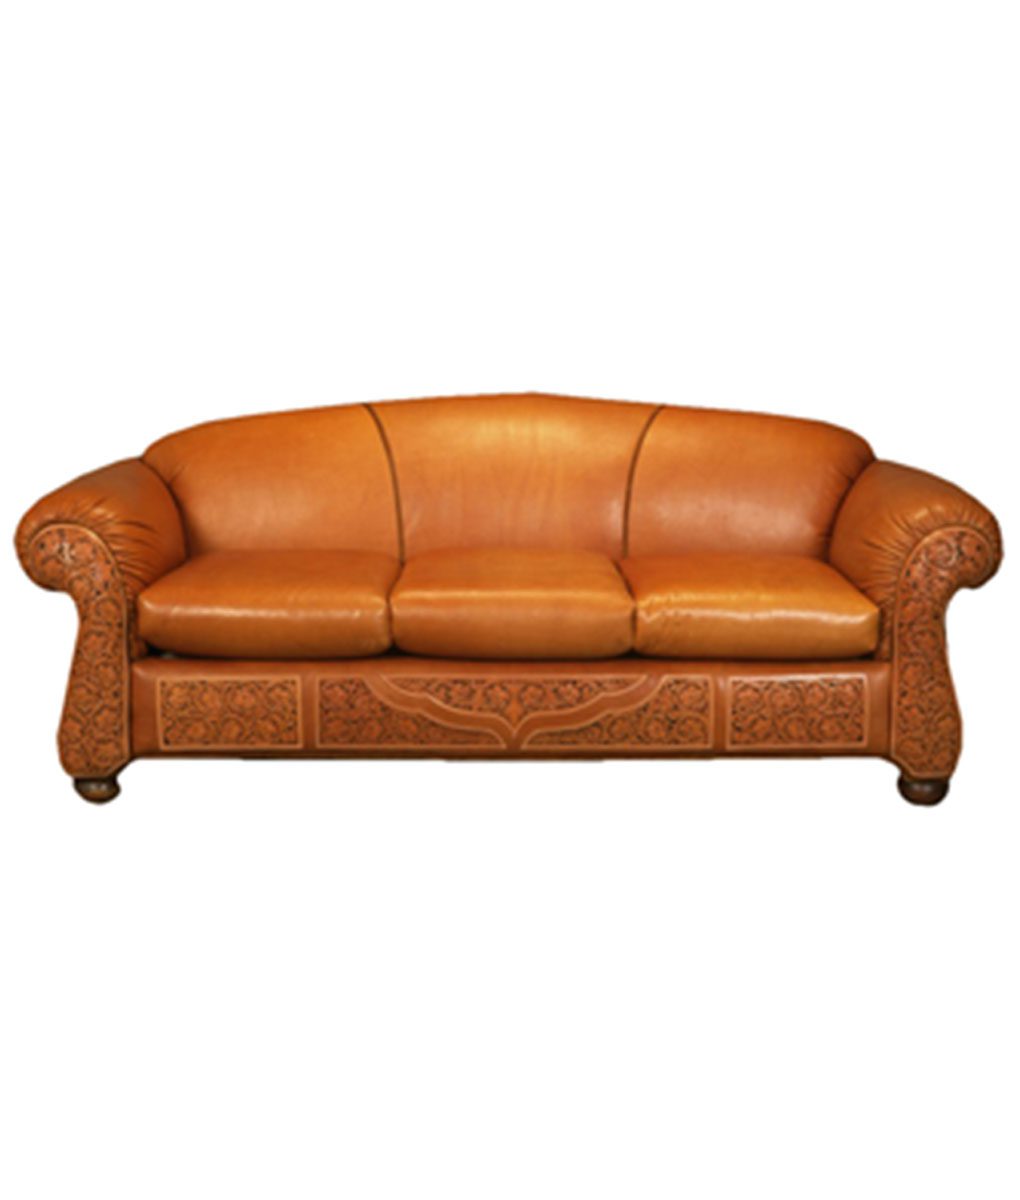 Tooled Leather Sofa Western, Rustic Leather Couch